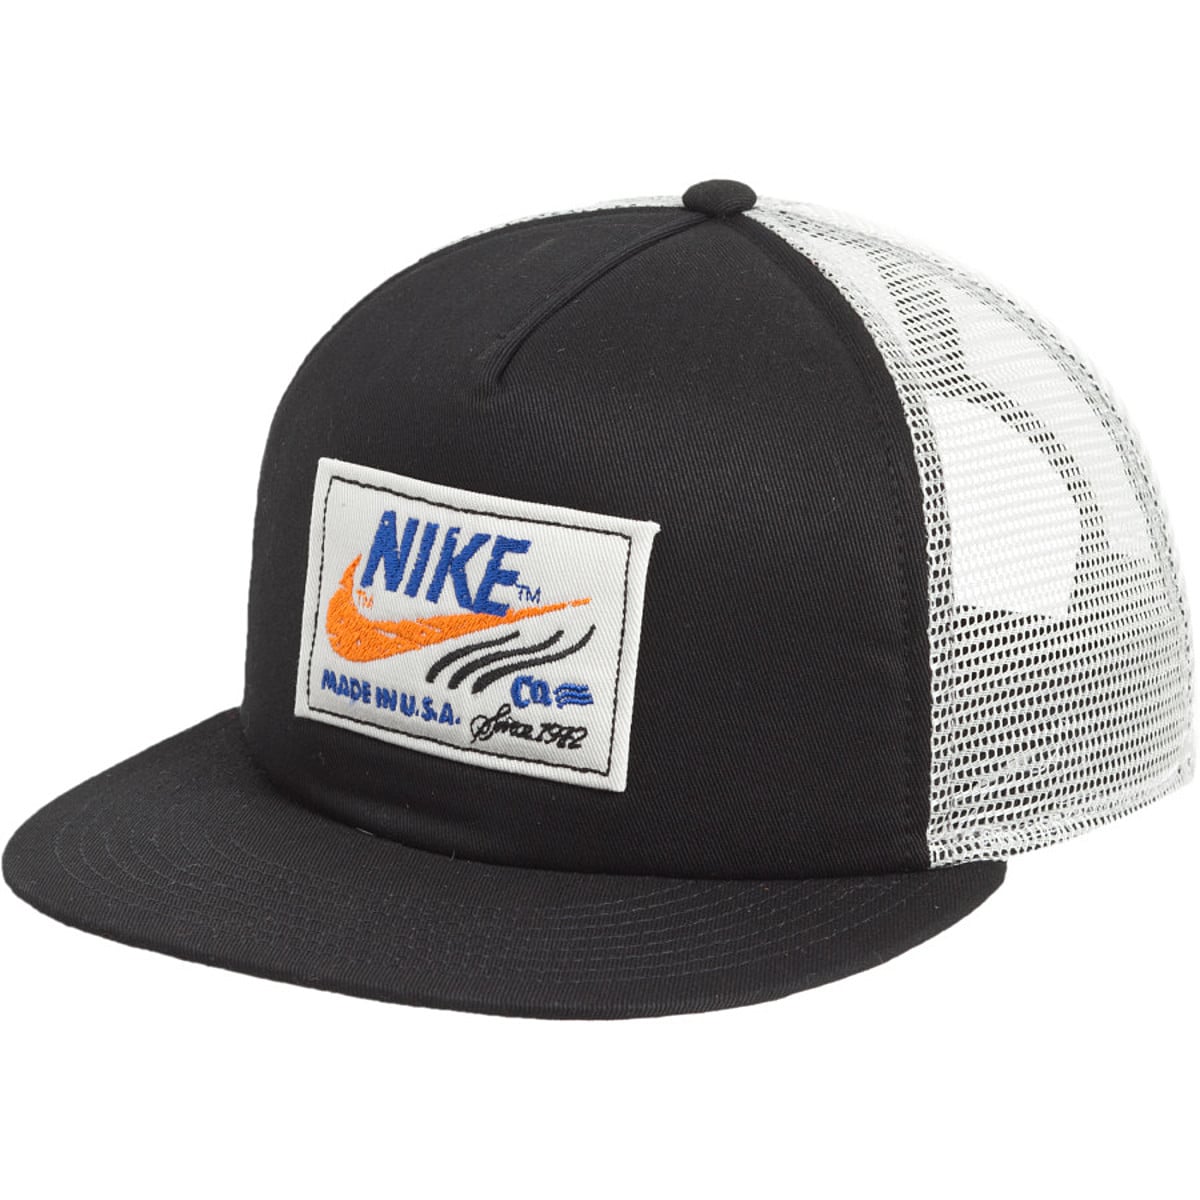 Nike Labeled Snapback Trucker Accessories